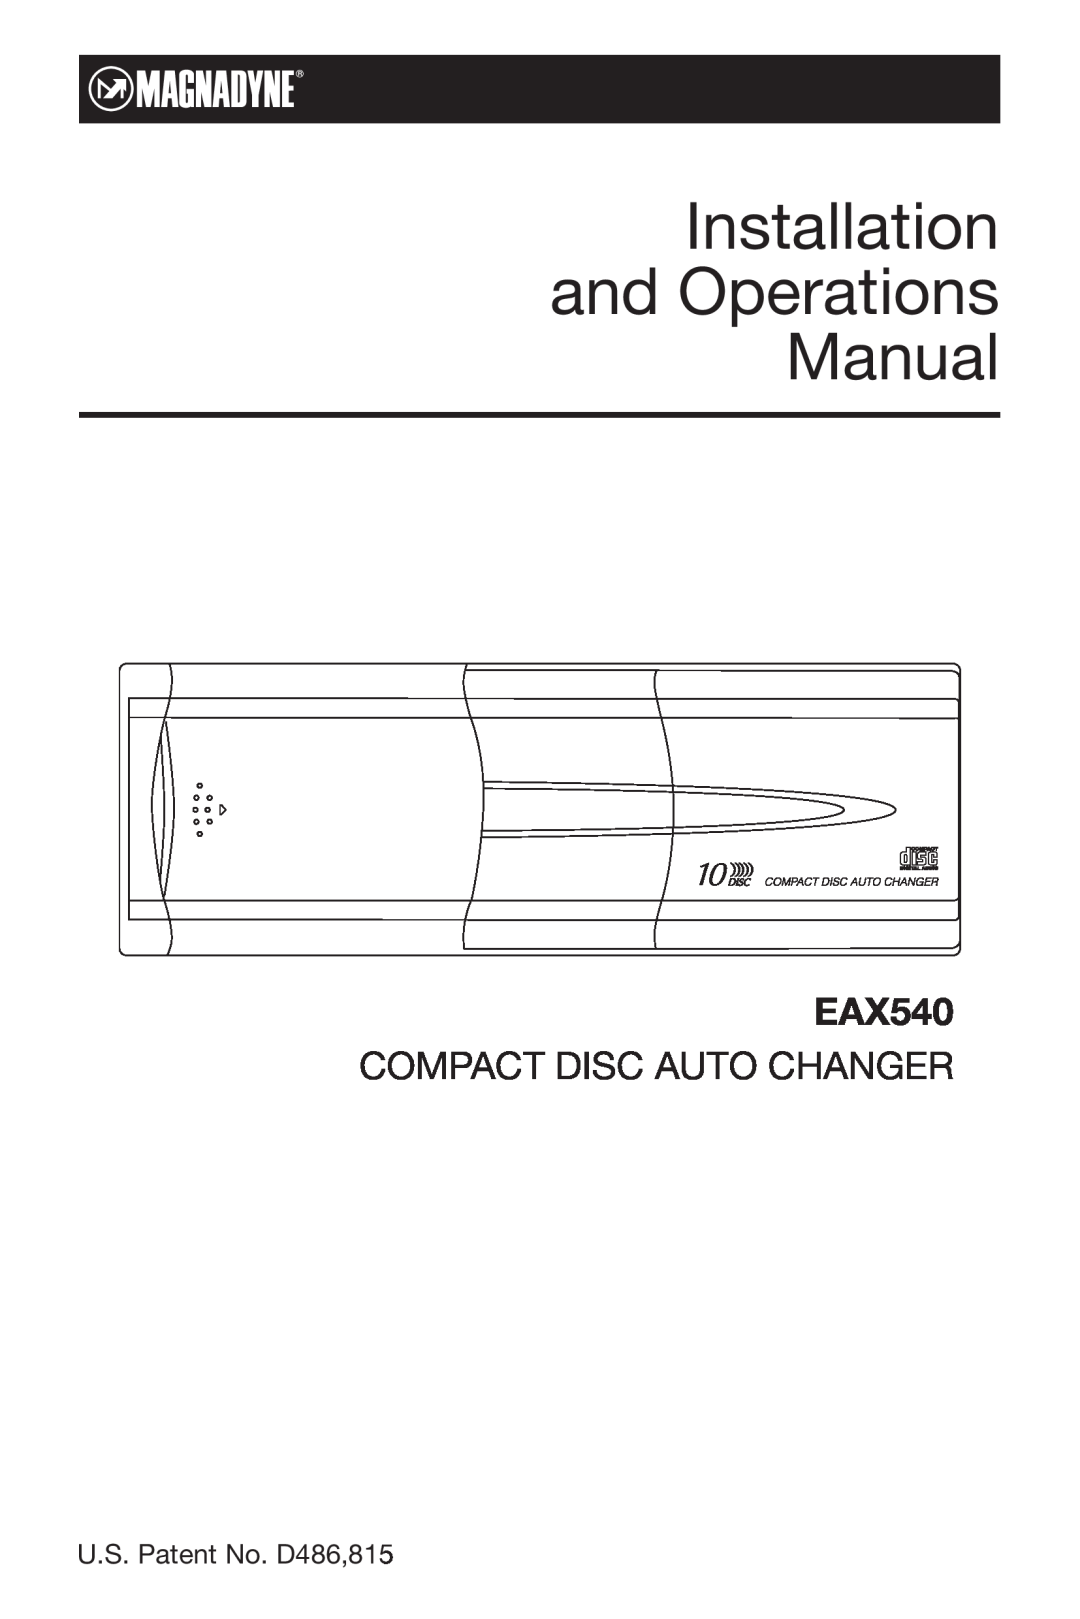 Magnadyne EAX540 manual Installation and Operations Manual, Compact Disc Auto Changer, U.S. Patent No. D486,815 